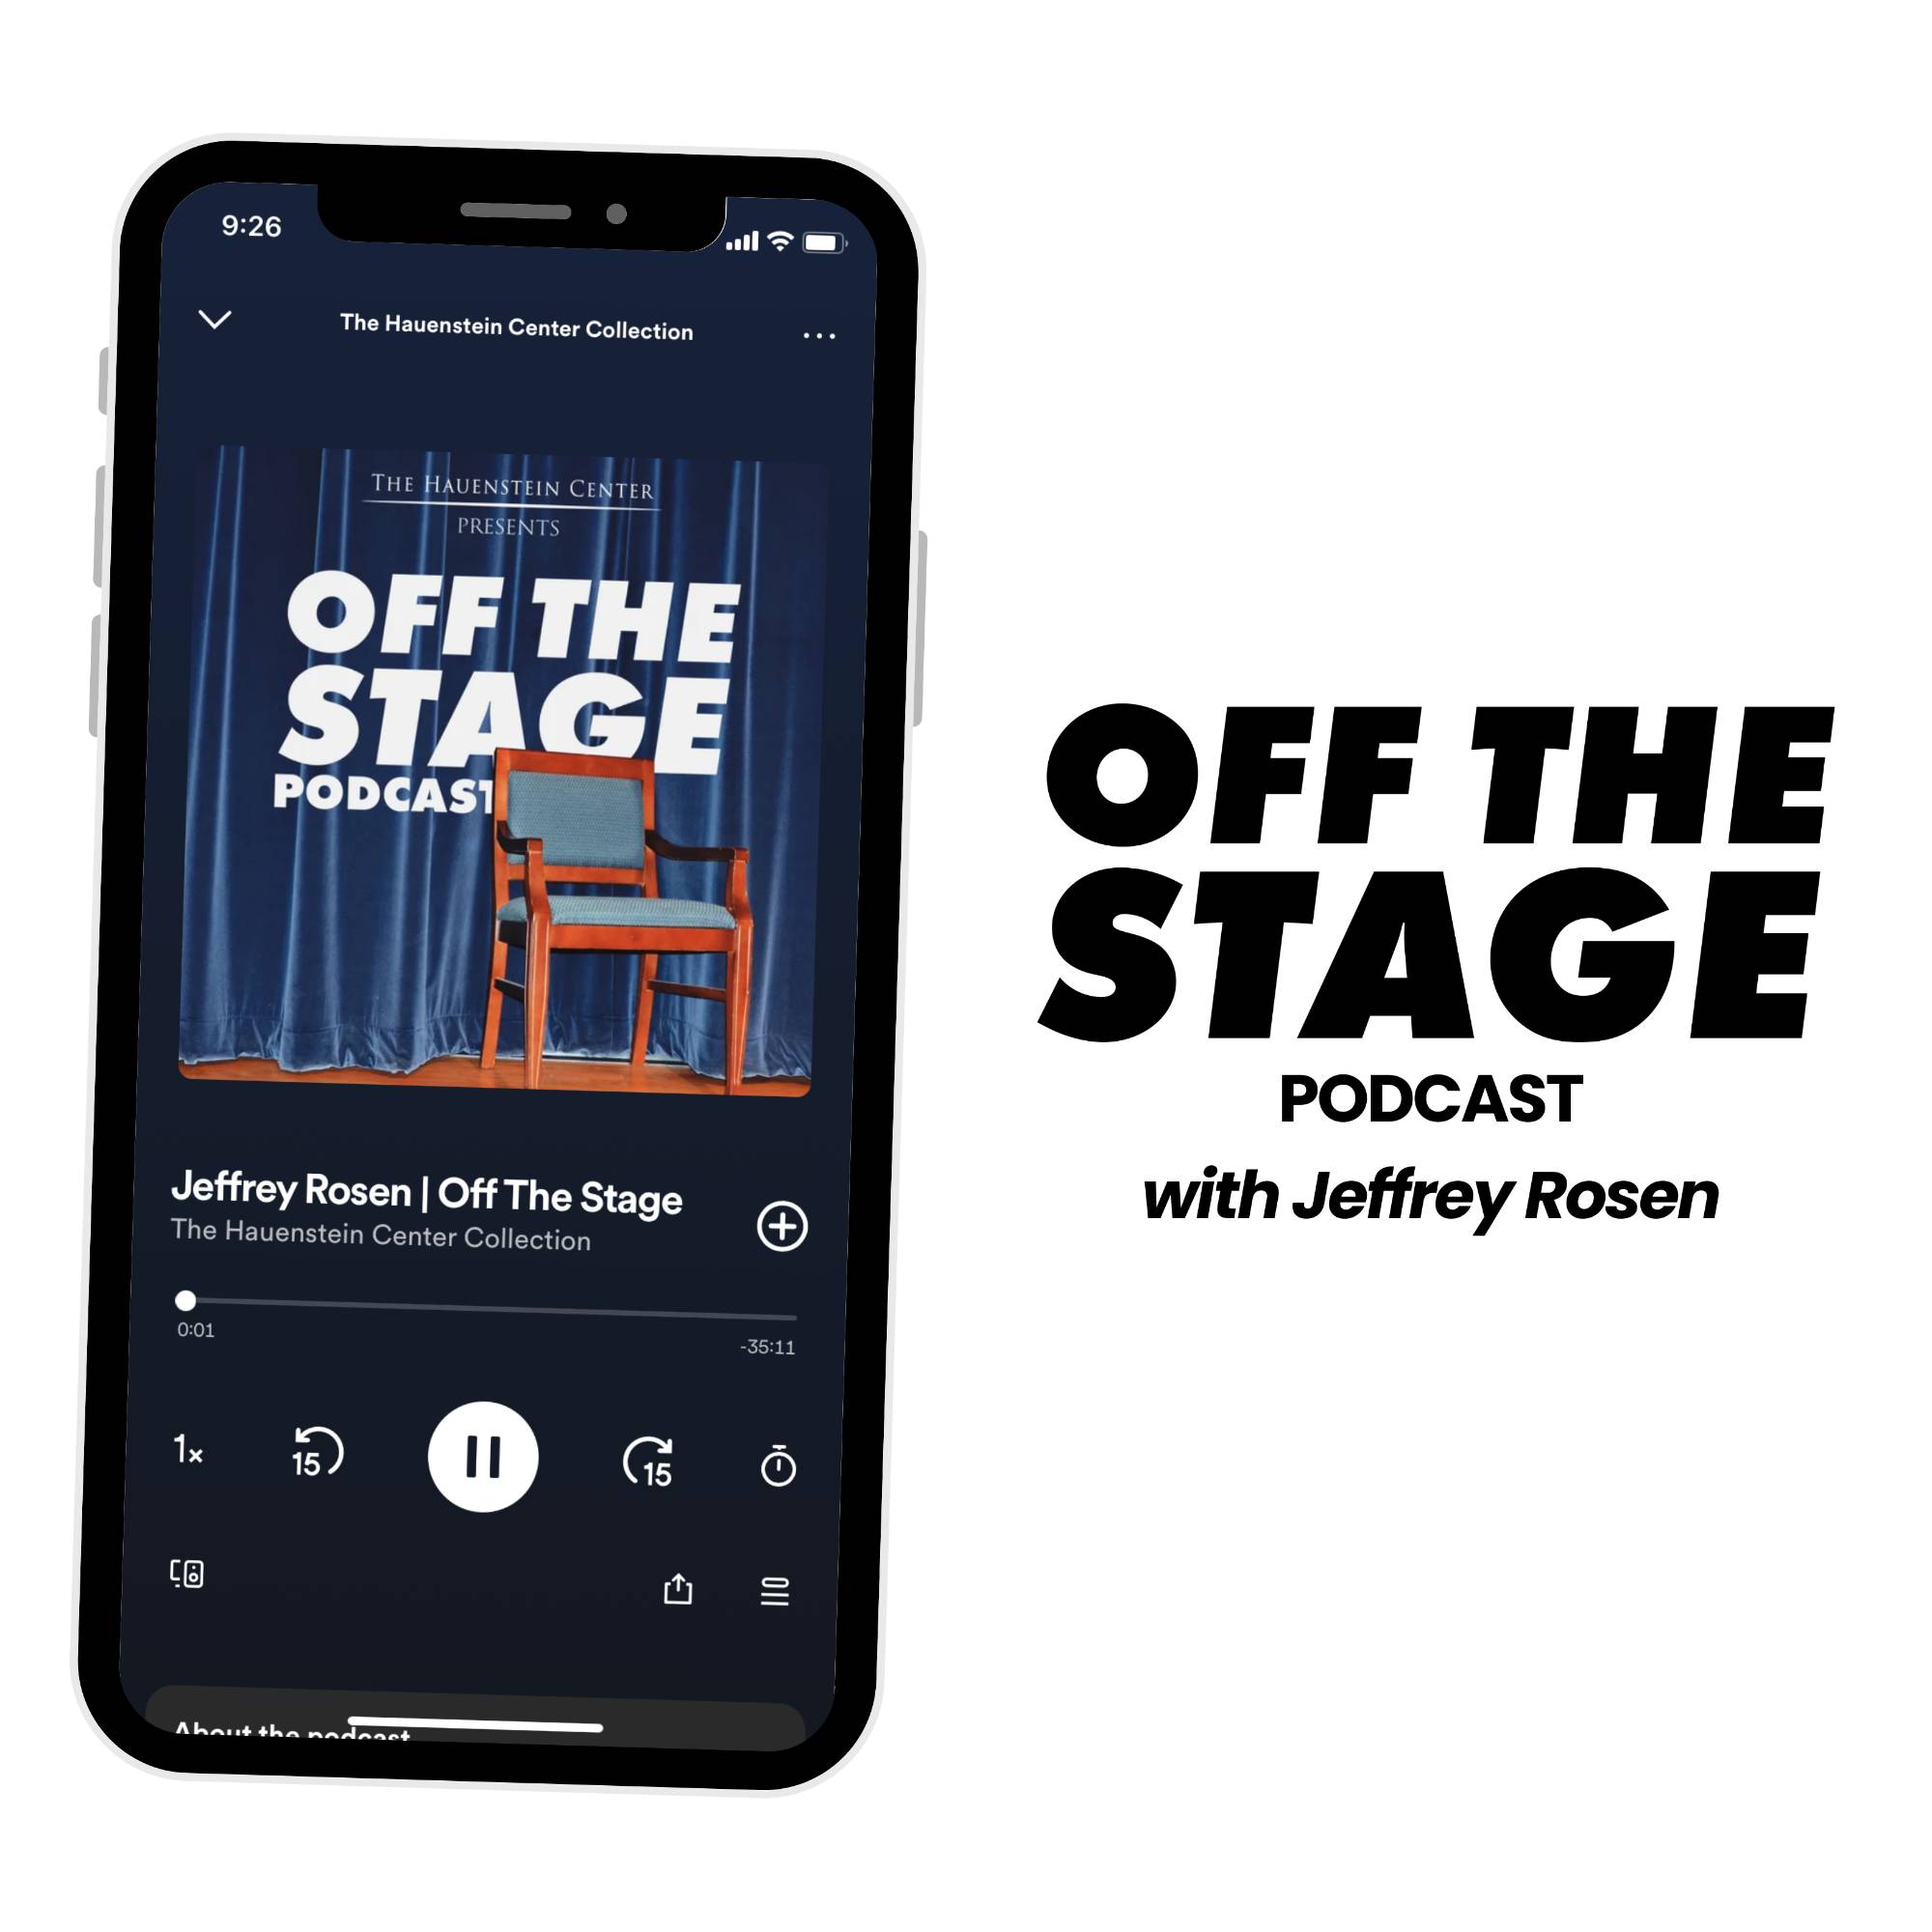 off the stage podcast with jeffrey rosen